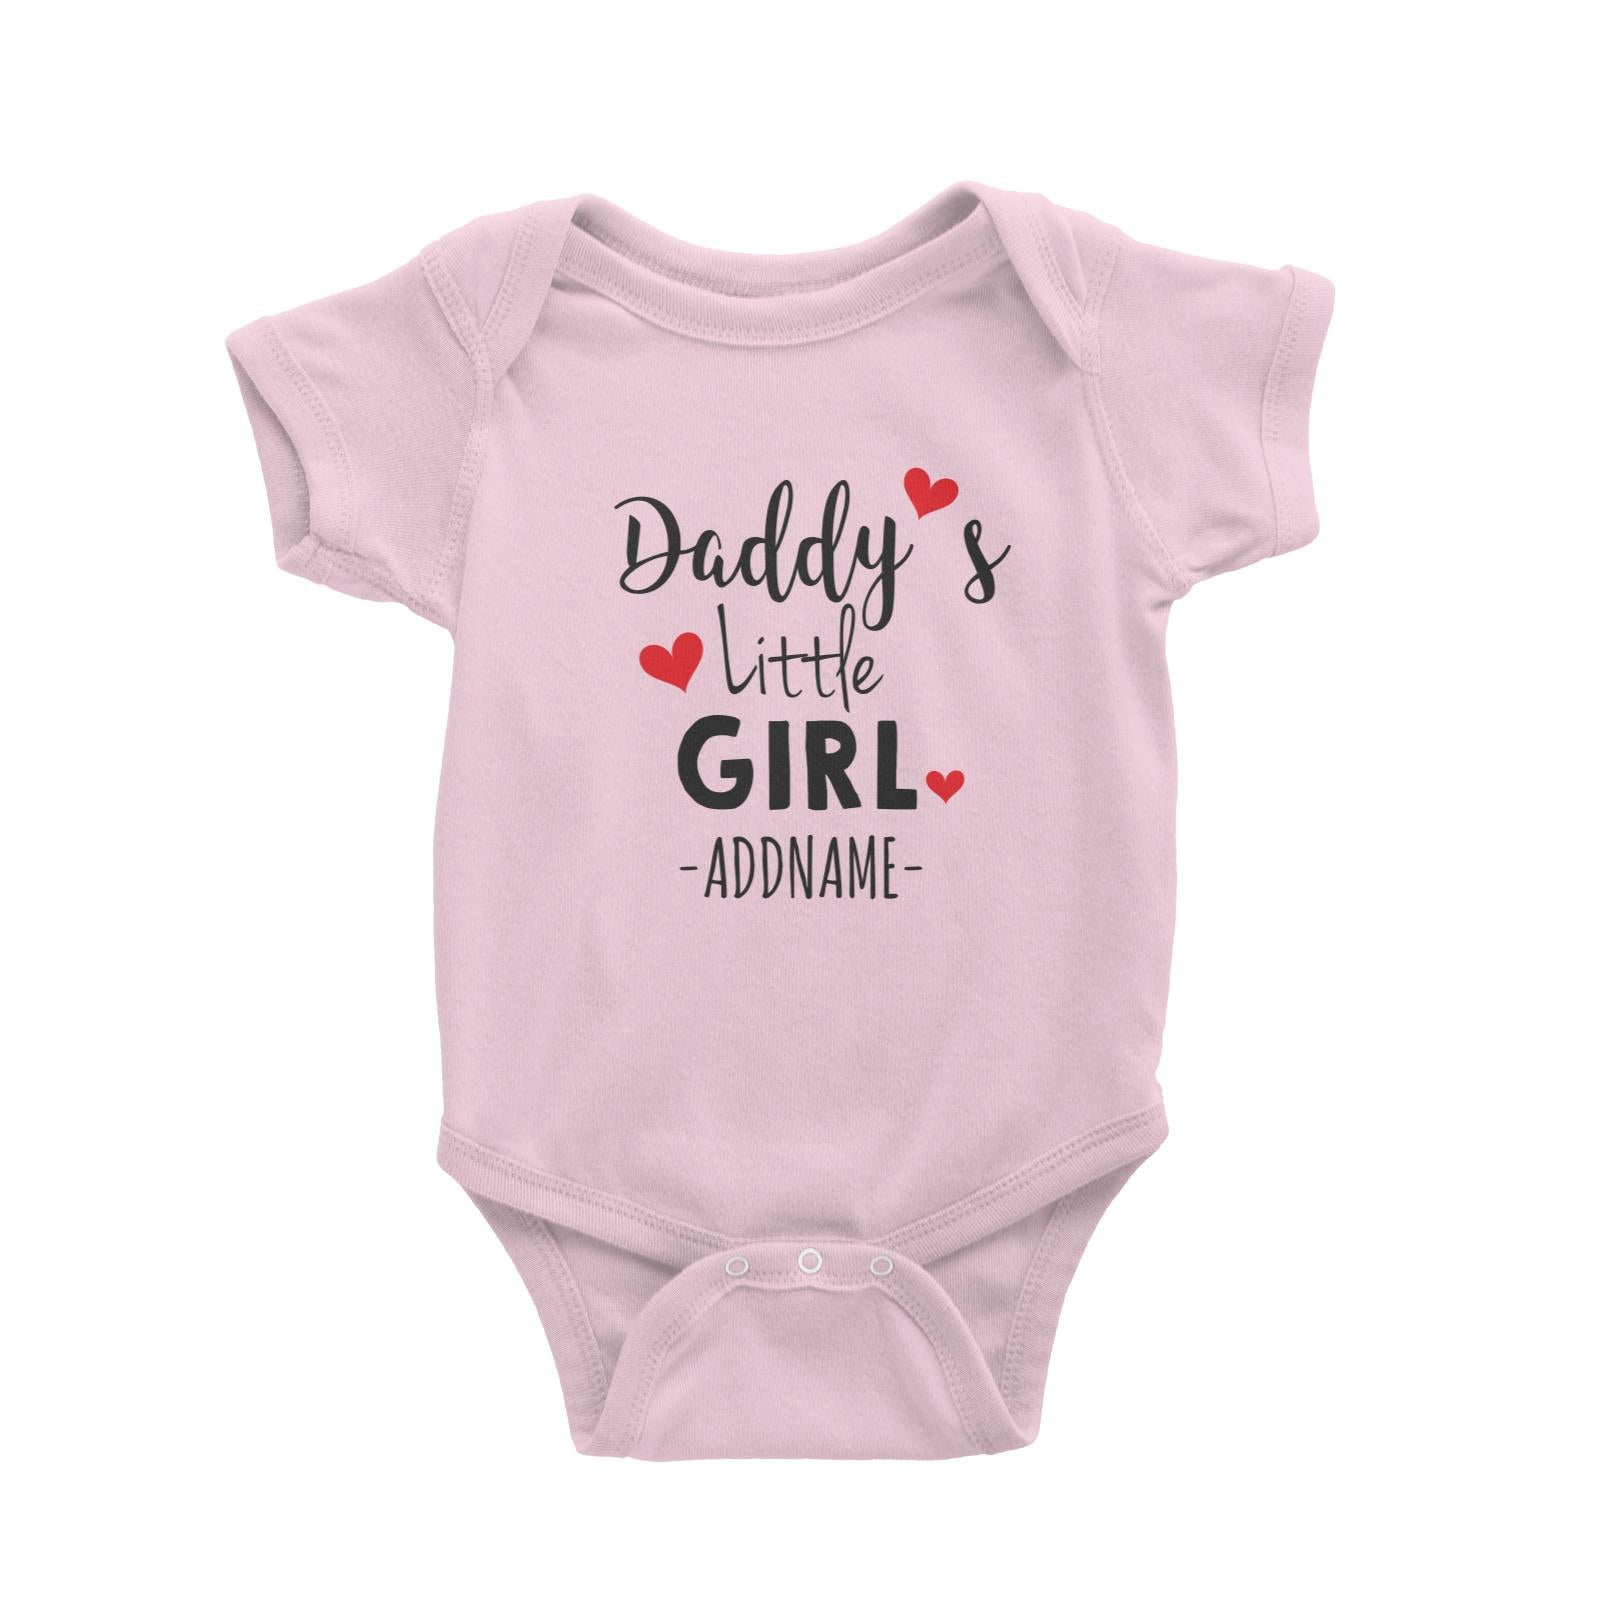 Daddy's Little Girl Addname Baby Romper Personalizable Designs Basic Newborn